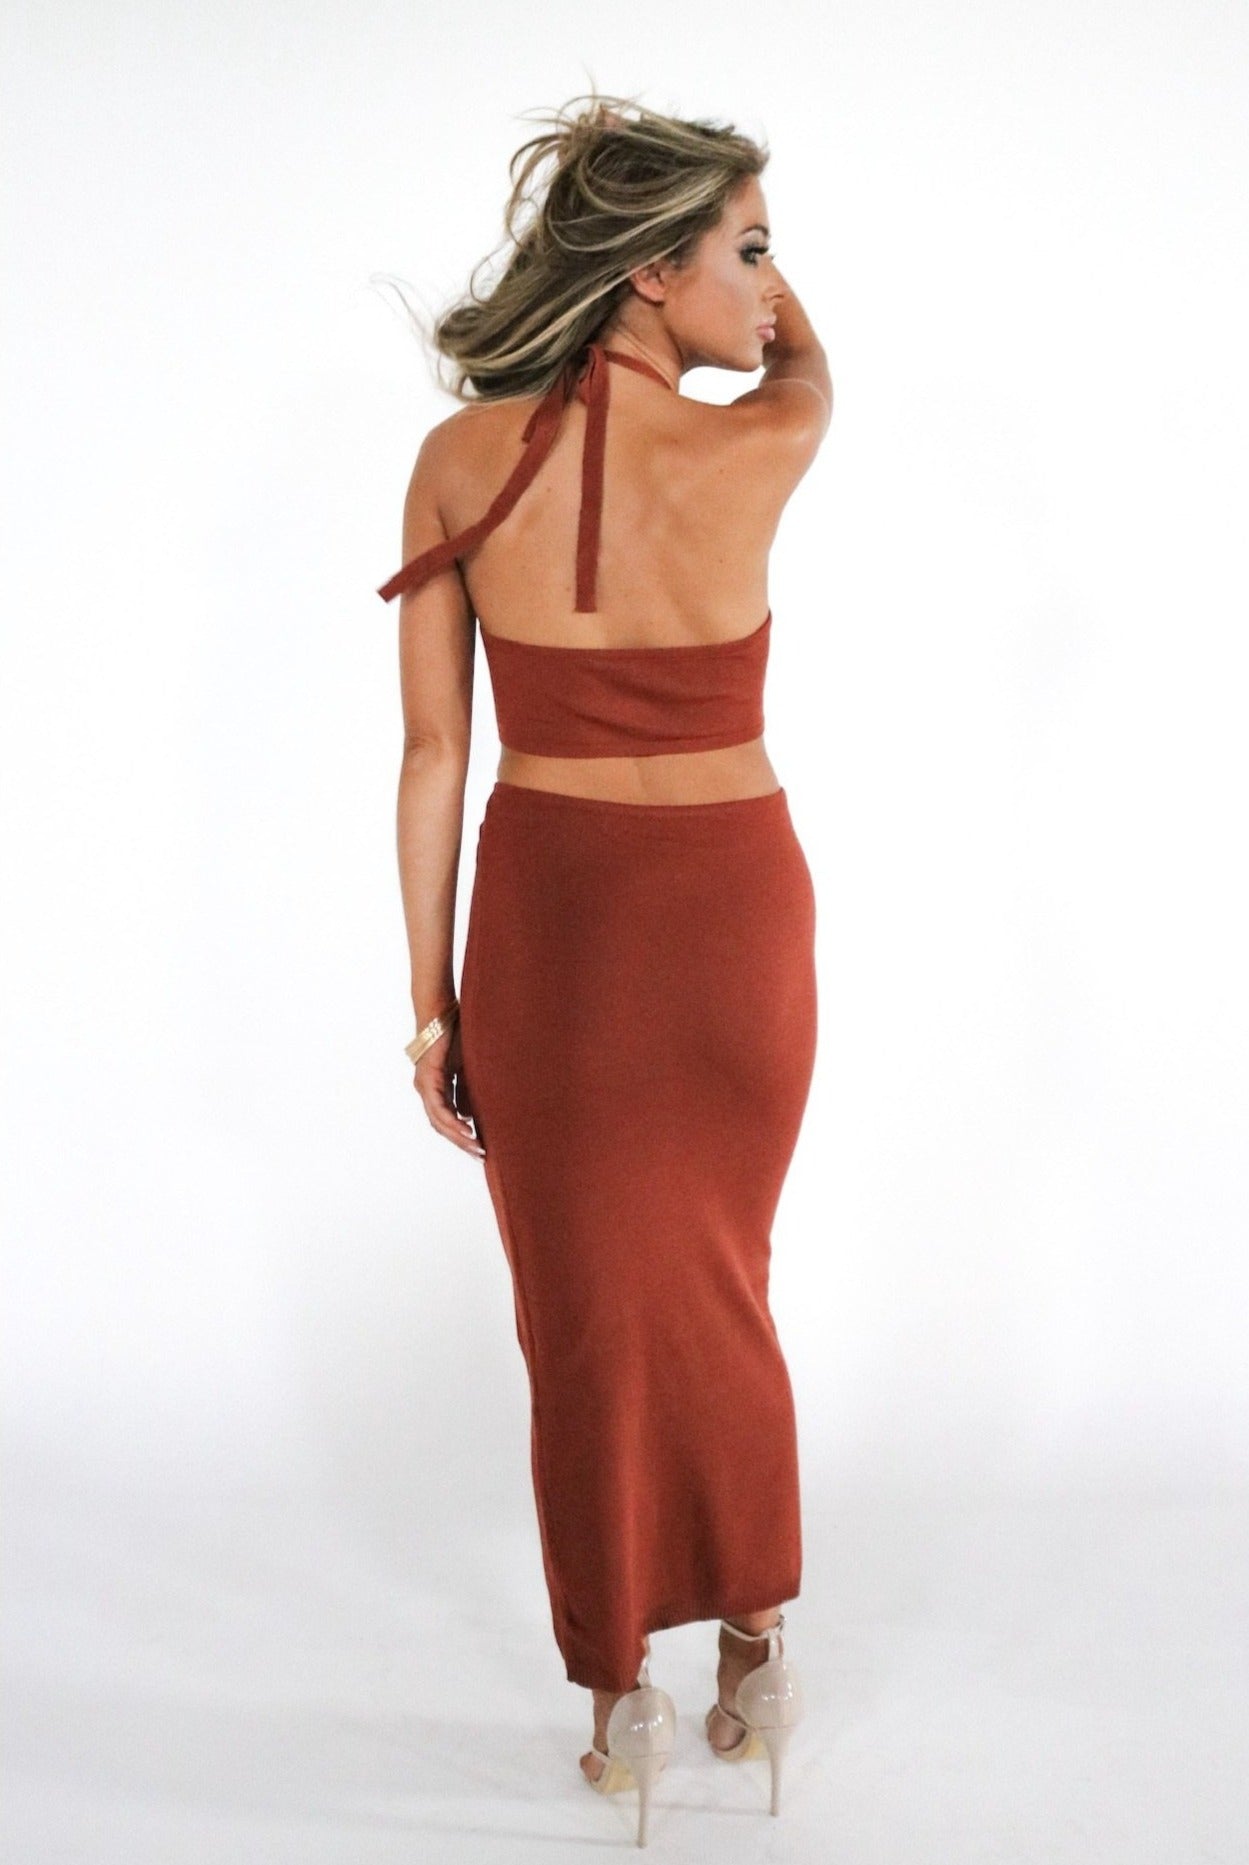 Knotted Cutout Midi Dress in Cinnamon Brown. Knot Dress. The Color Code Collection. Scarlette The Label, an online fashion boutique for women. 